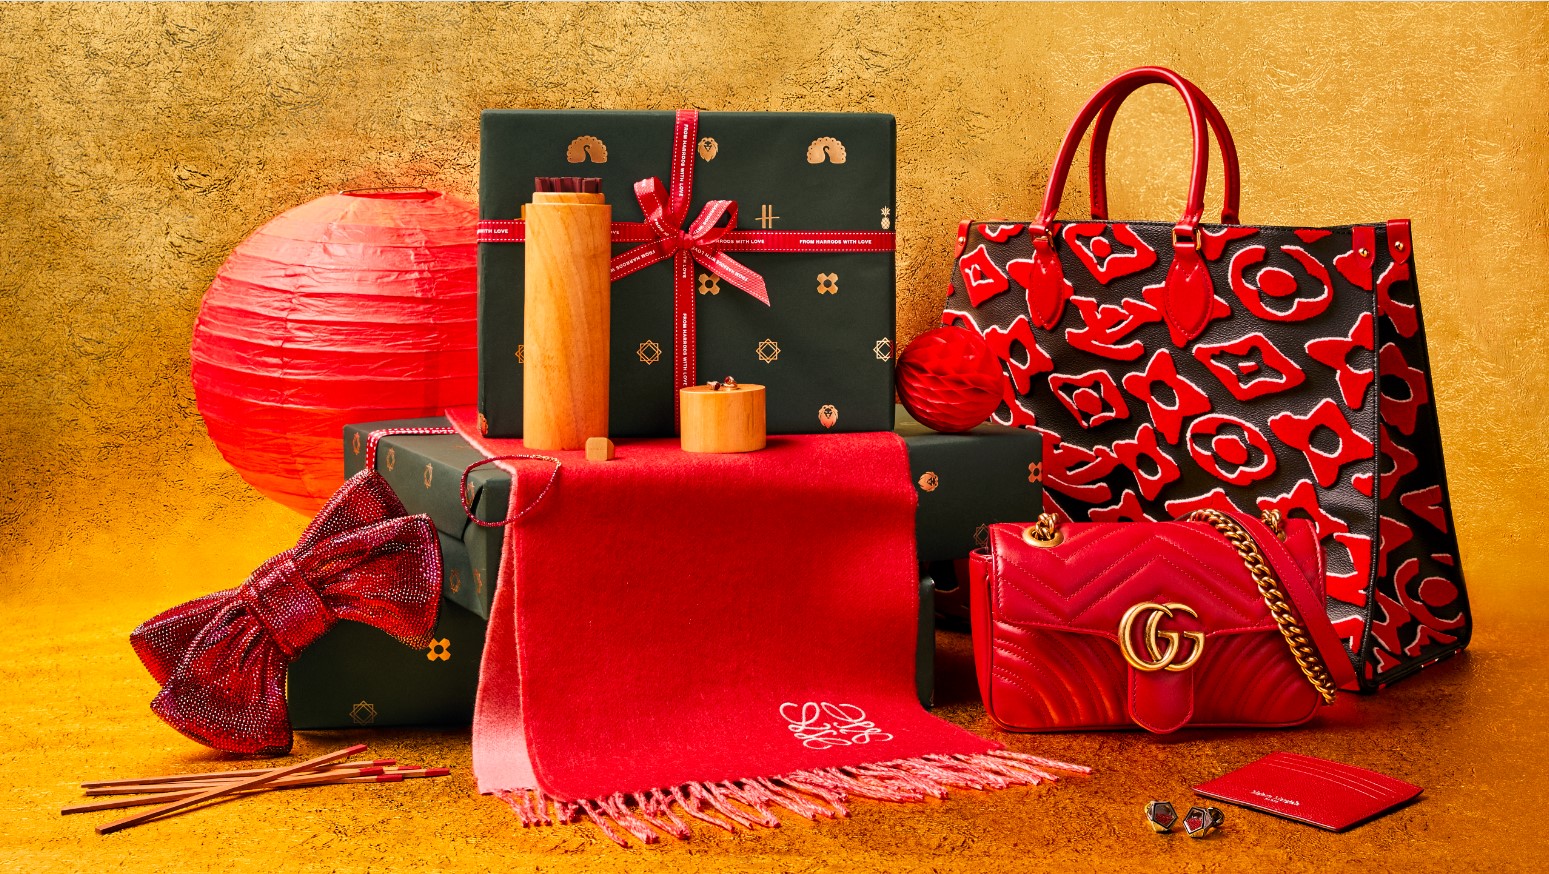 Chinese New Year for Harrods.com